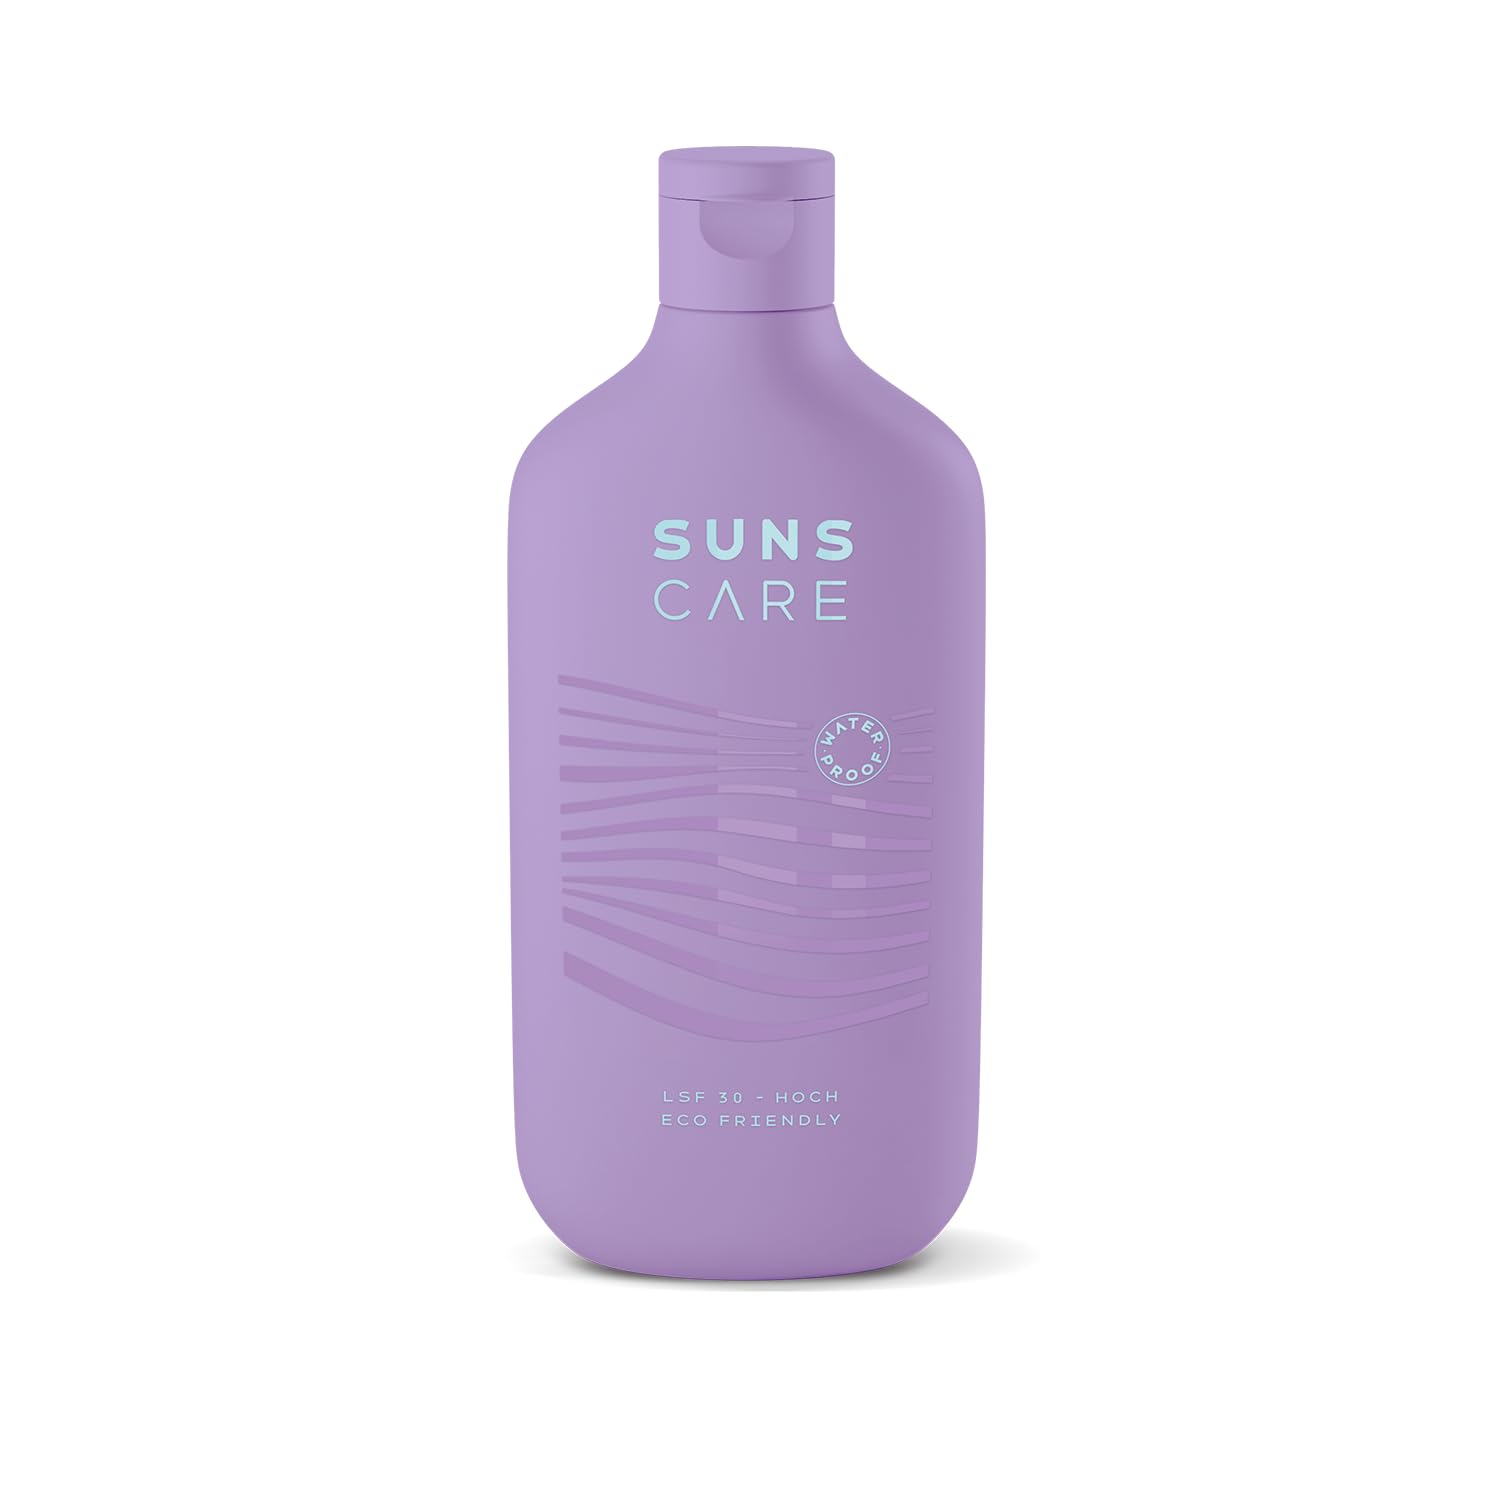 SUNS THIRTY WATERPROOF SPF 30 Waterproof Sustainable Vegan Sports Sun Cream High UVA & UVB Protection Care Ingredients Face and Body Non-Greasy Ohe Microplastic (Purple Sun 180 ml)